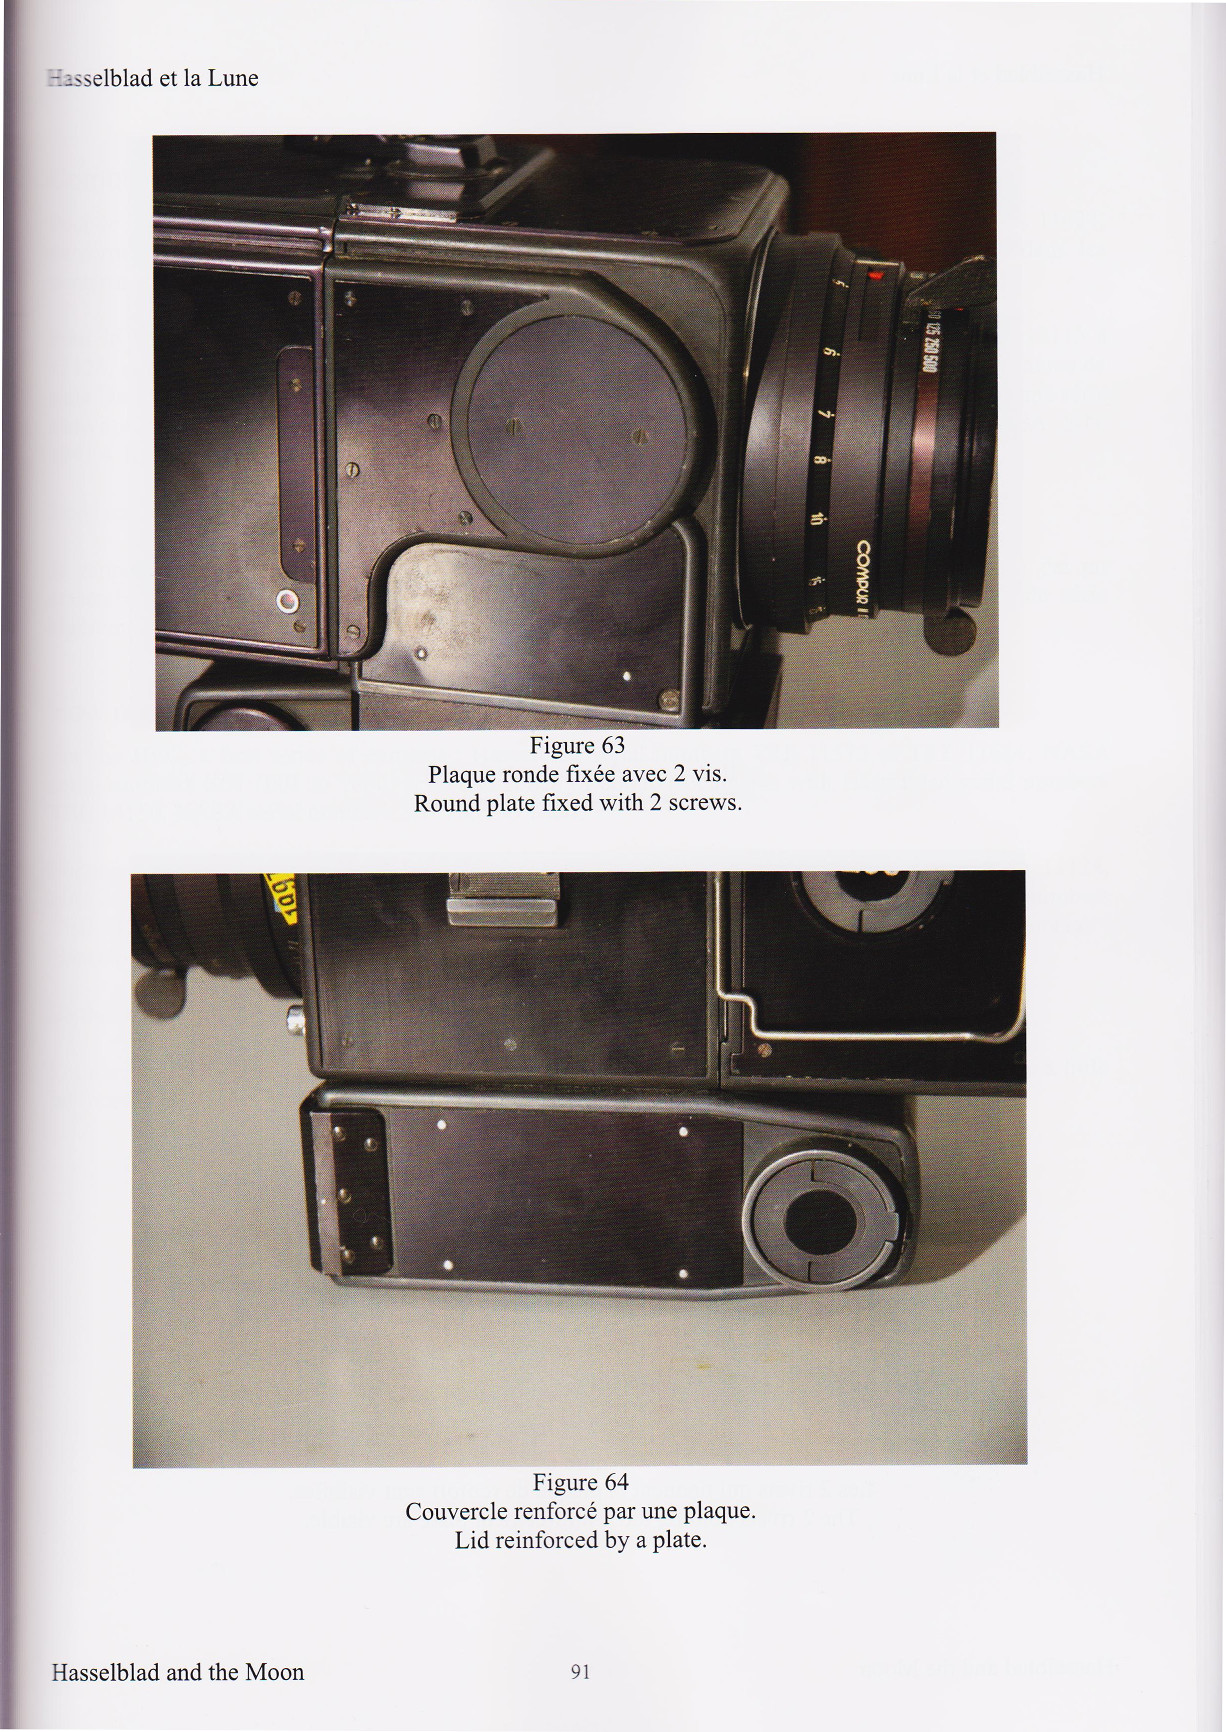 Hasselblad and the Moon - Book page 91